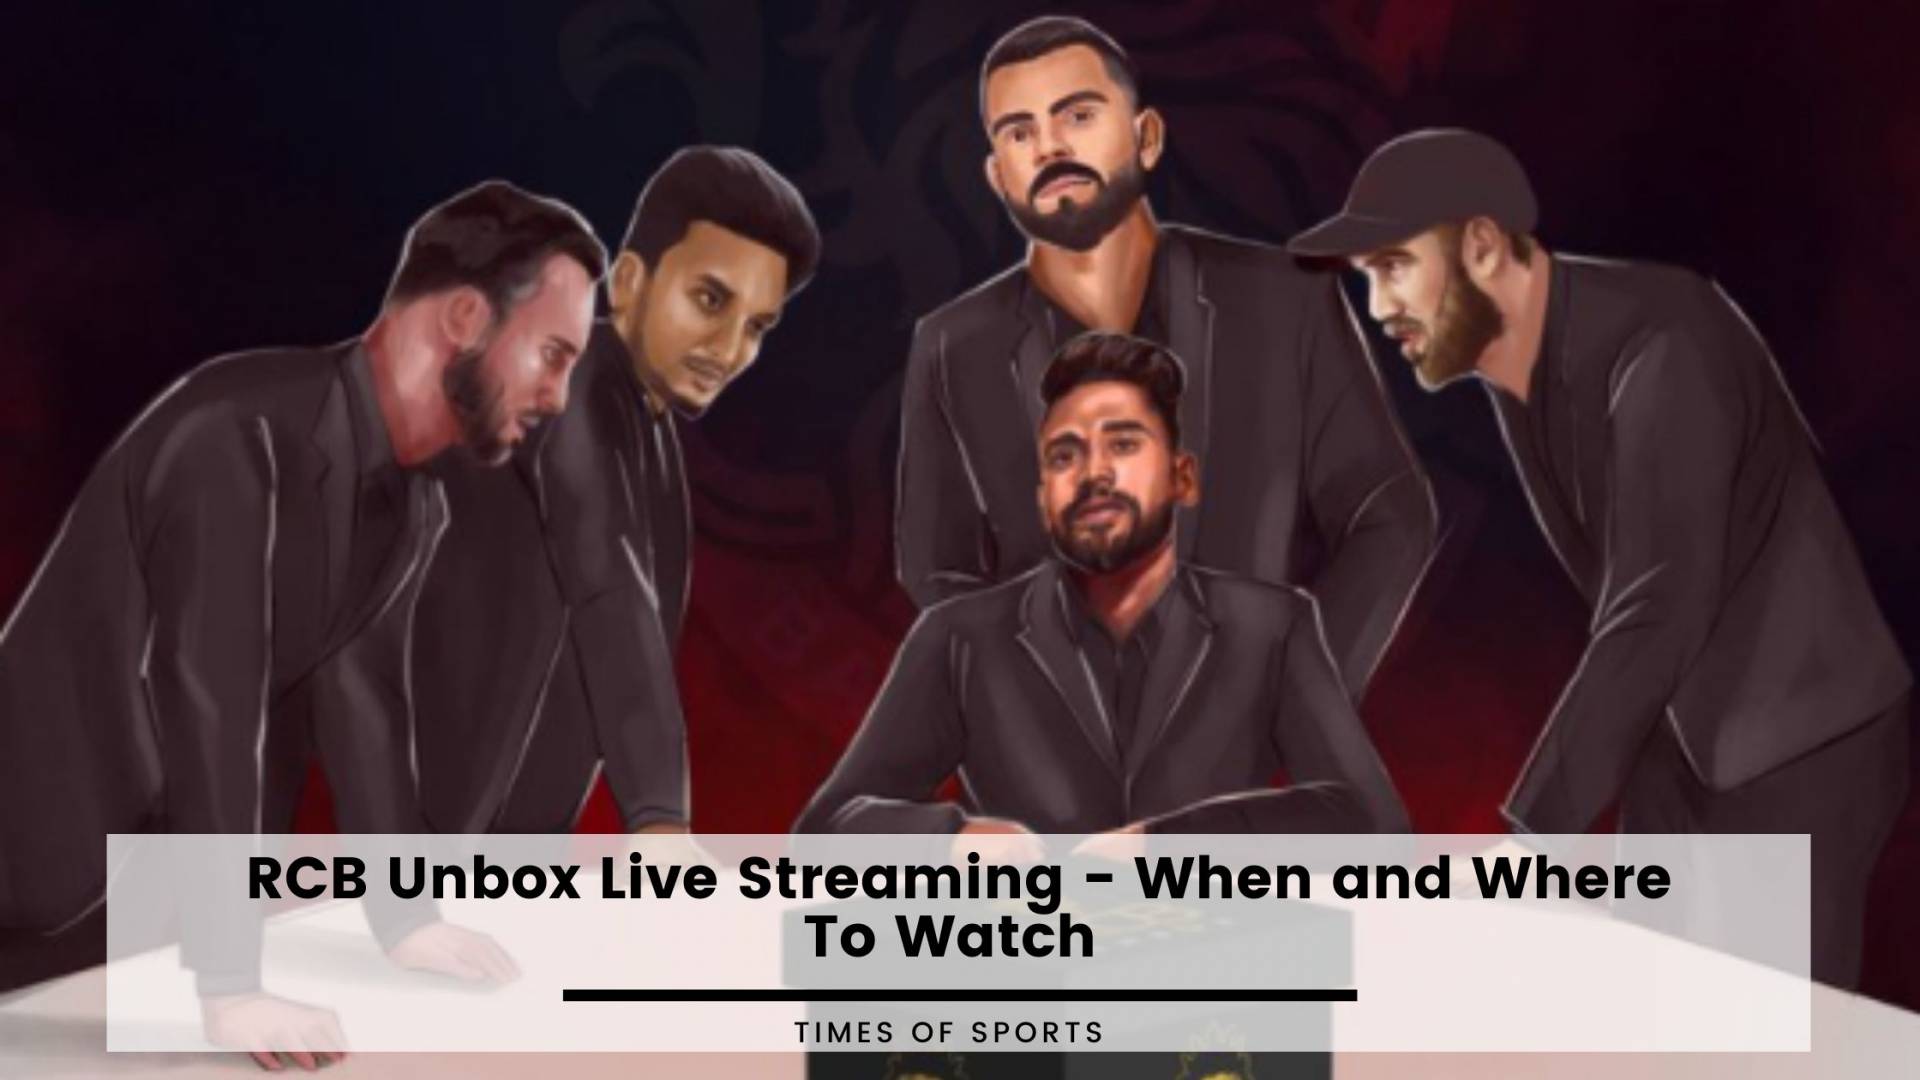 RCB Unbox Live Streaming When and Where To Watch Event